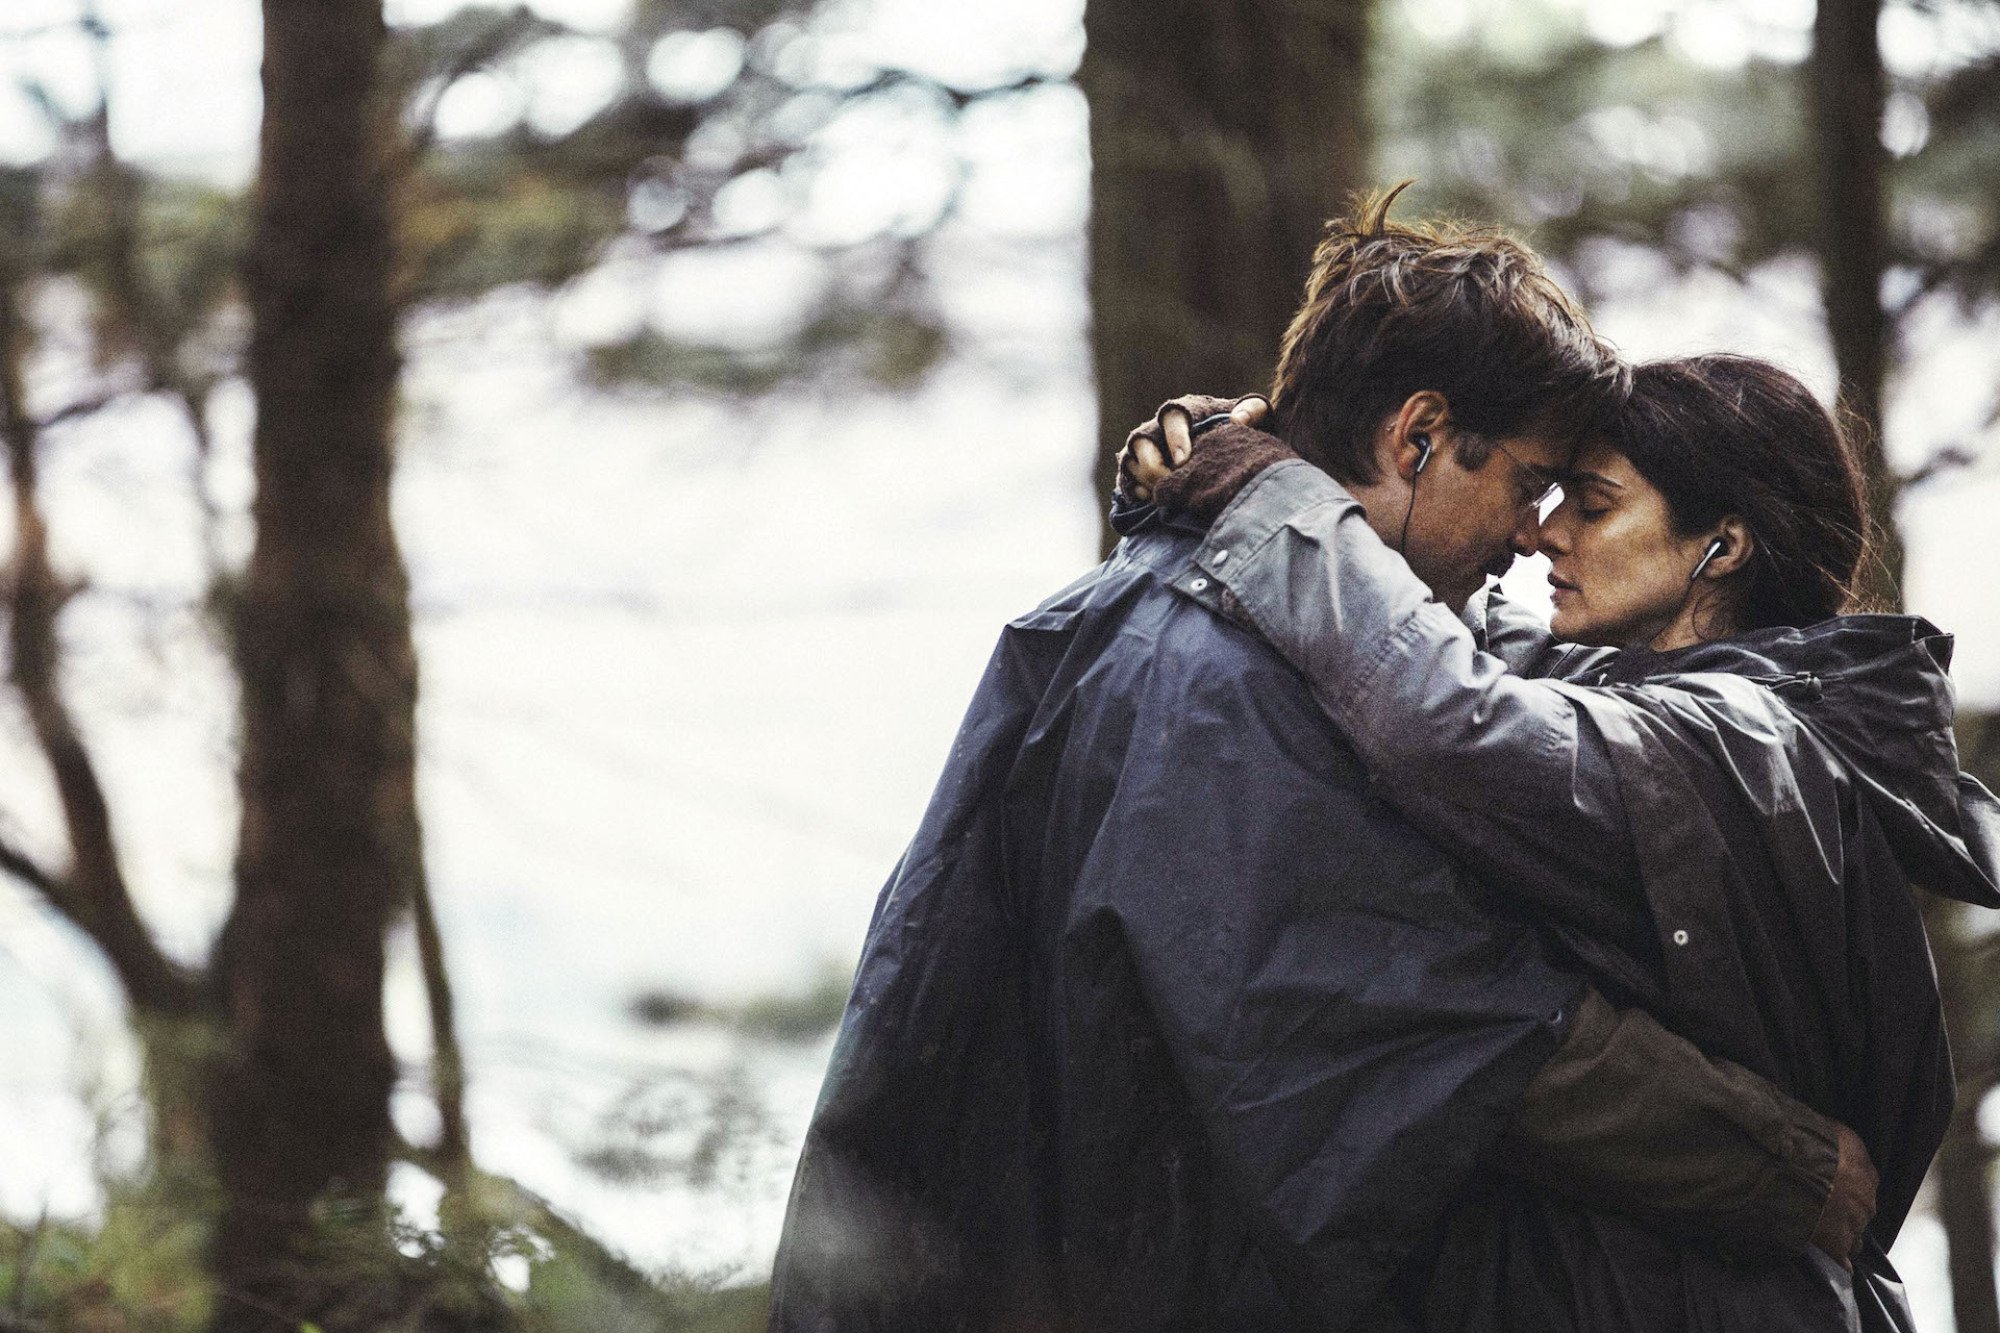 Colin Farrell and Rachel Weisz embrace in a forest in "The Lobster."